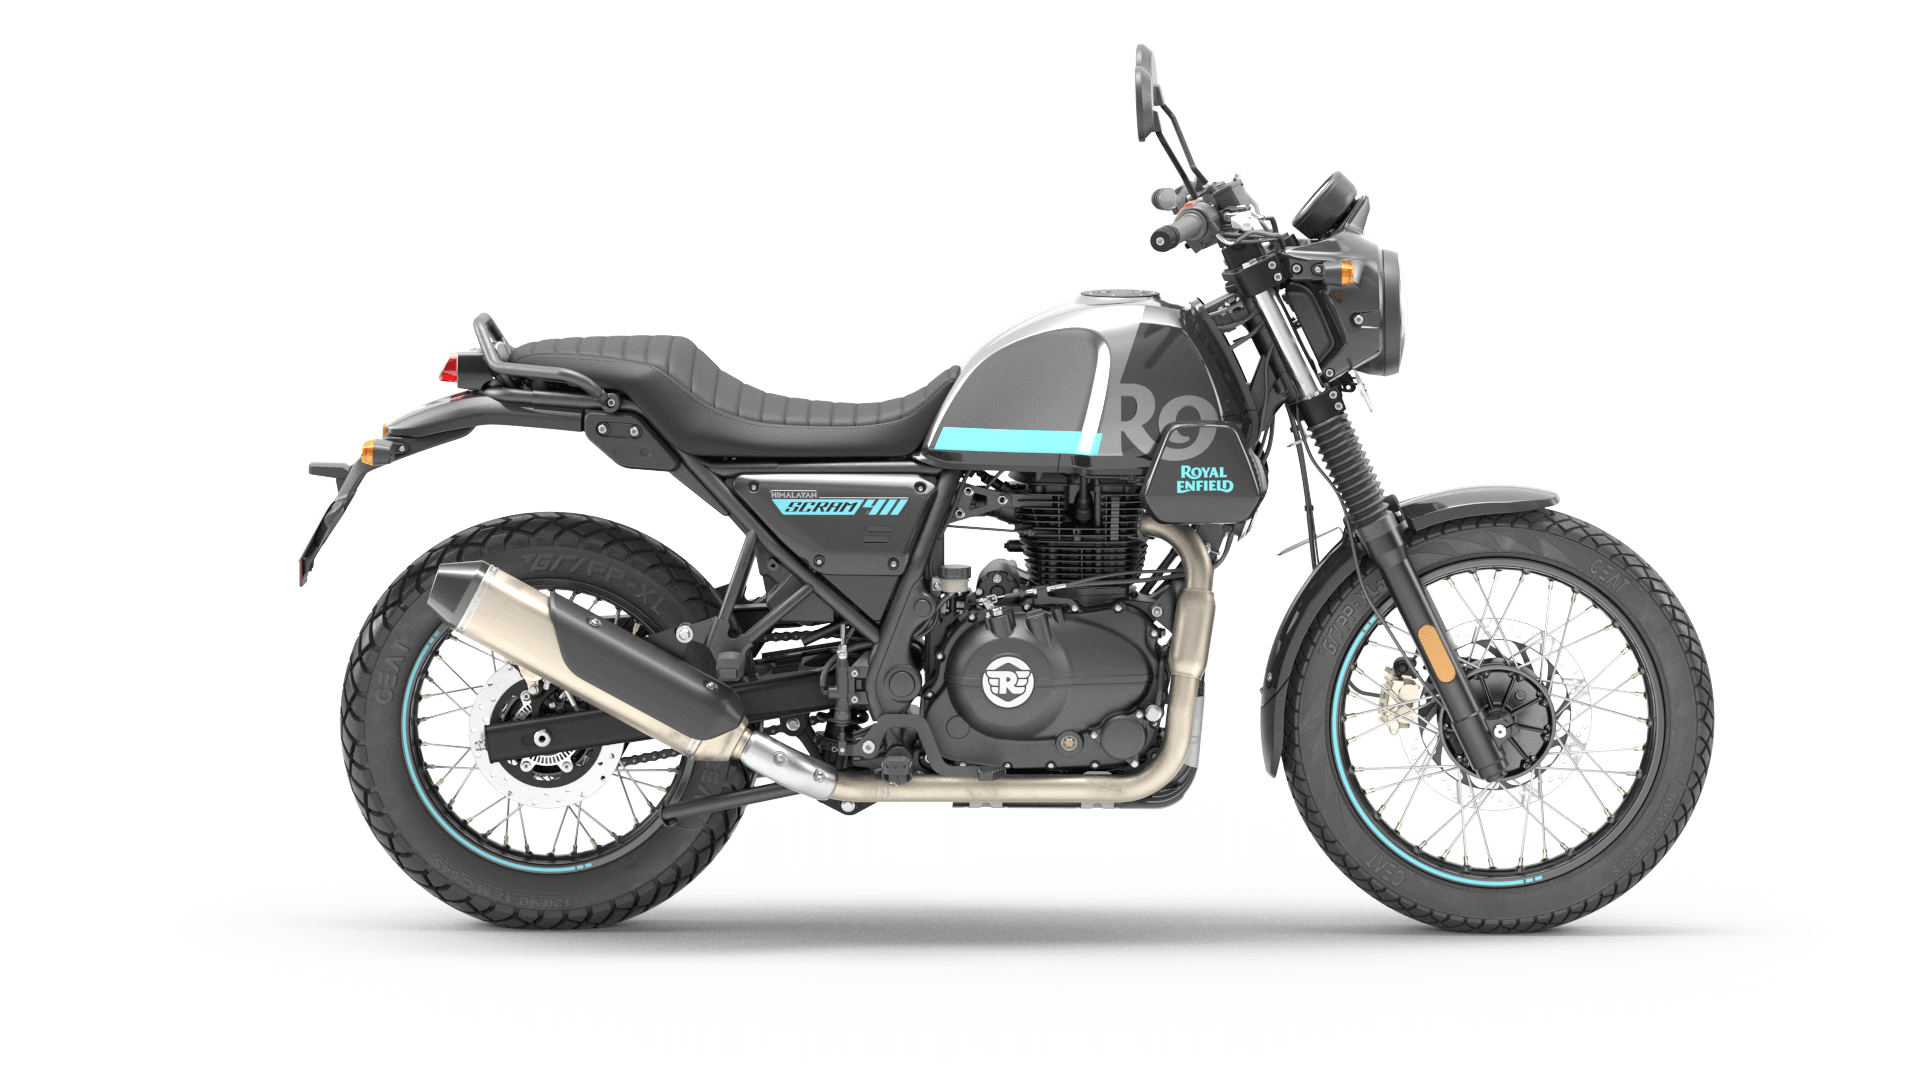 https://www.royalenfield.com/content/dam/royal-enfield/india/motorcycles/scram/colors/studio-shots/silver-spirit-turquoise/01-silver-spirit.png